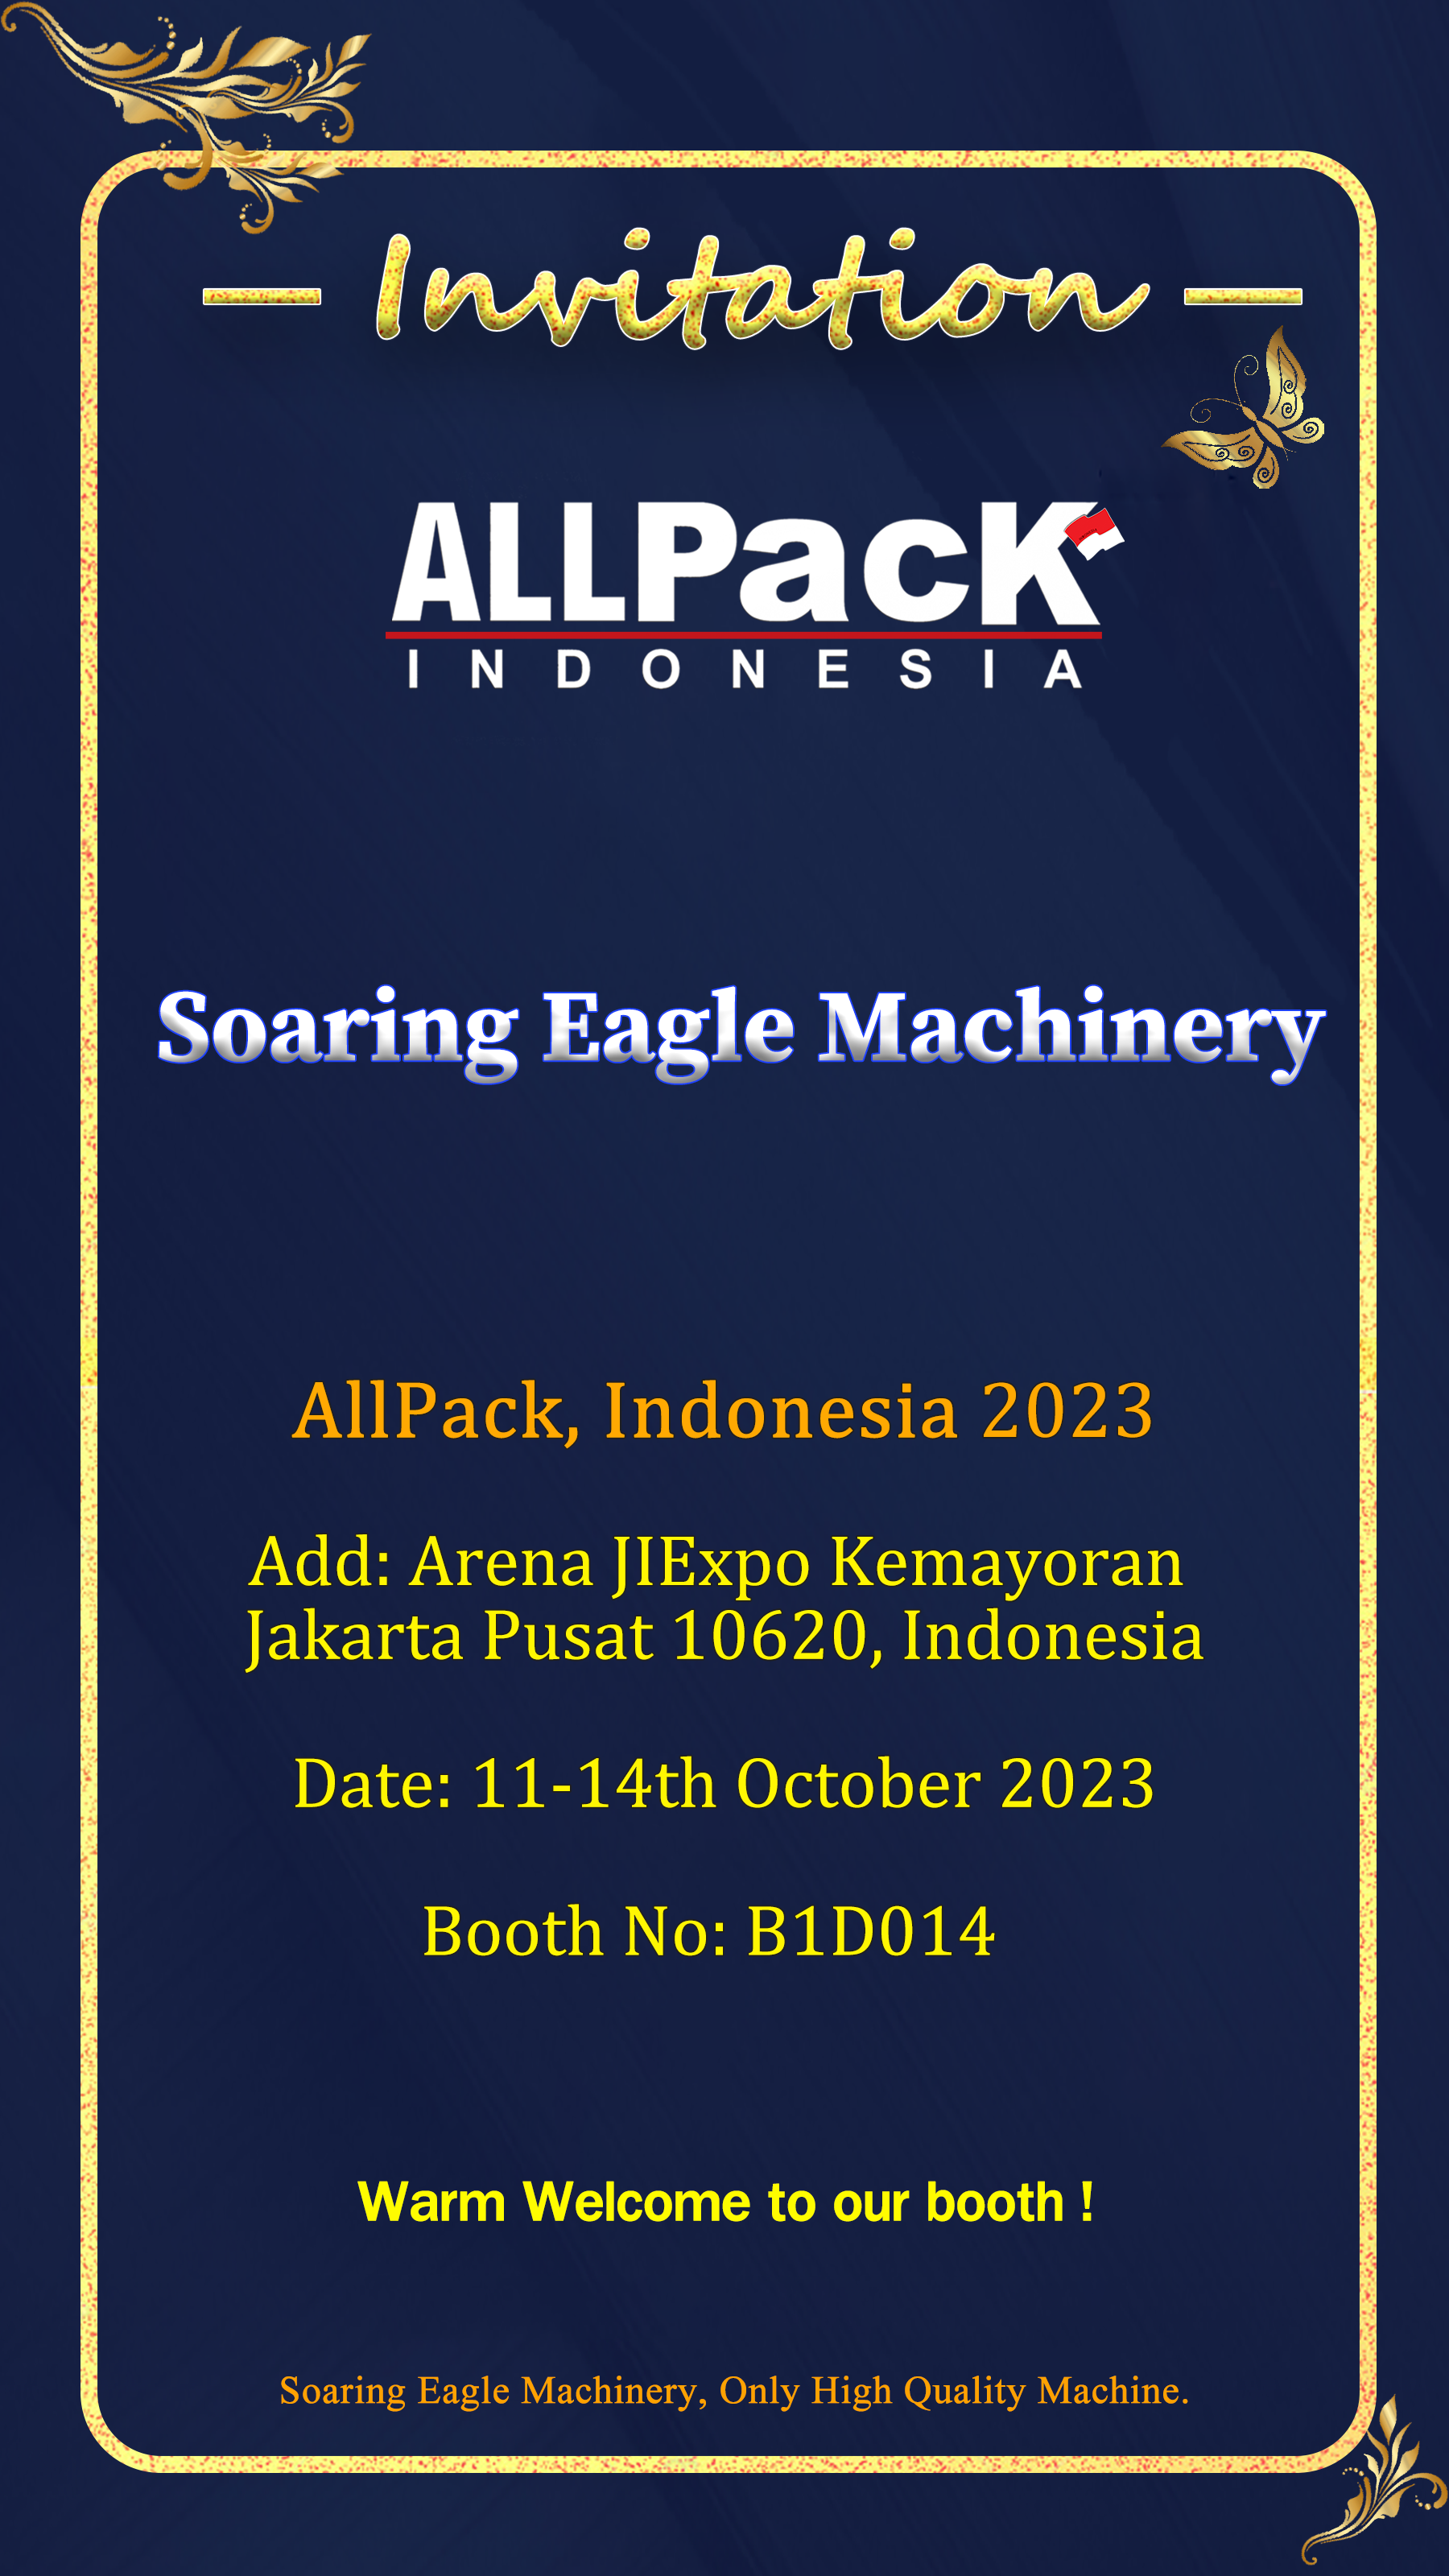 Warm welcome to our Indonesia booth